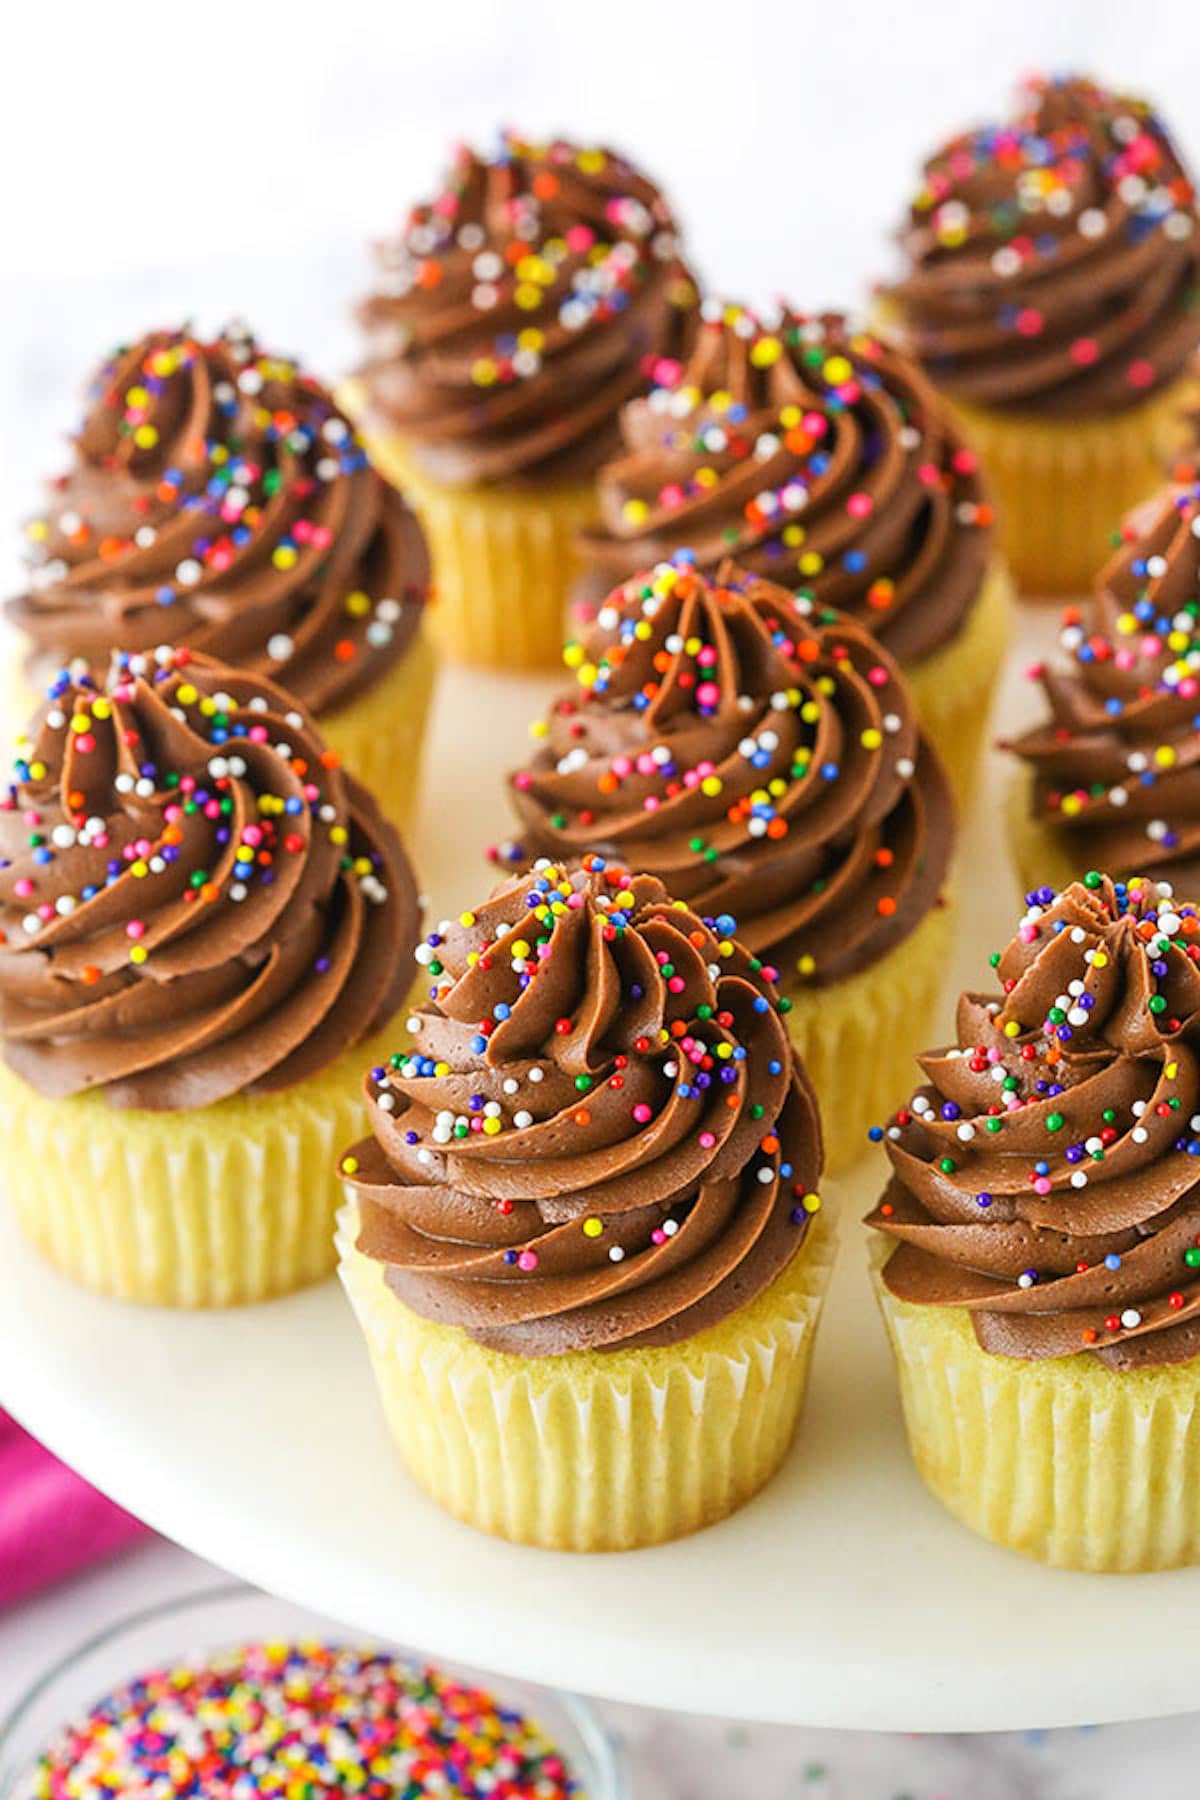 A platter full of yellow cupcakes with chocolate frosting and sprinkles. 